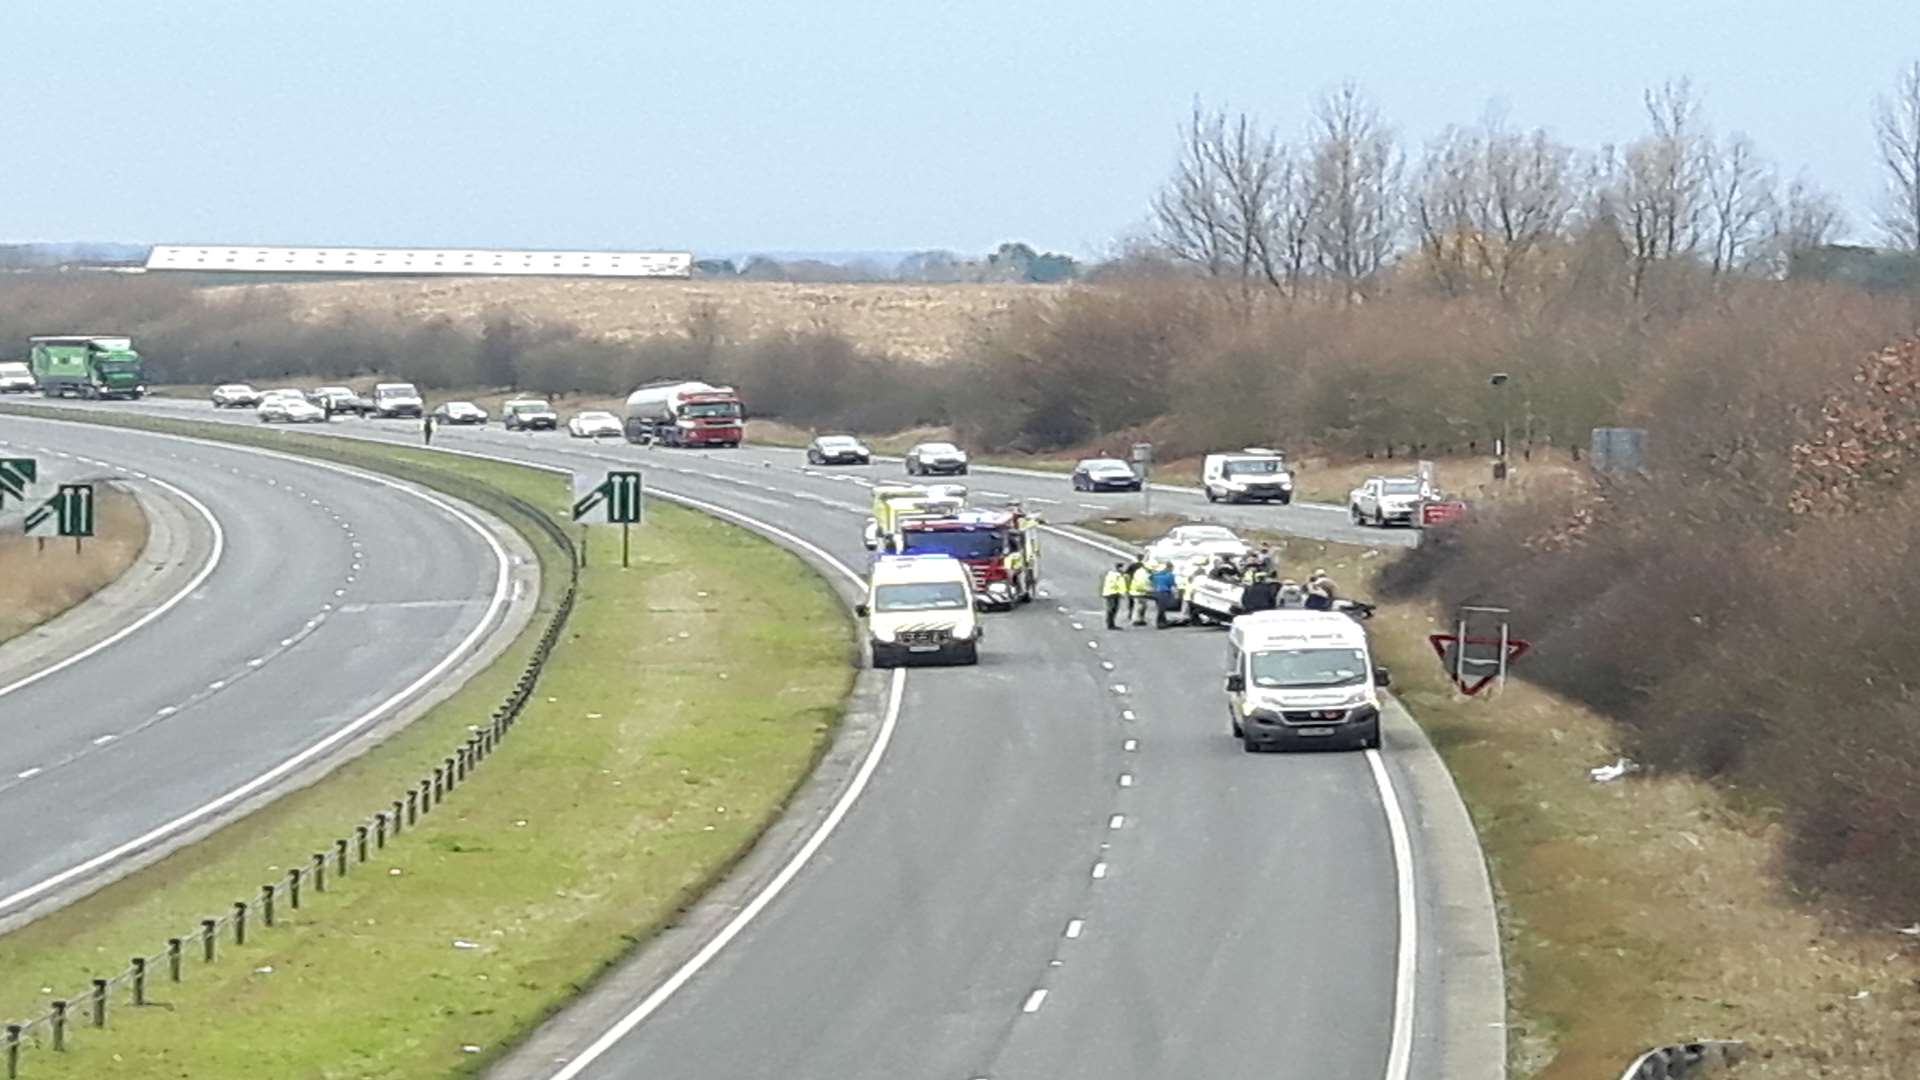 Fire crews and police were called to the accident on the A249